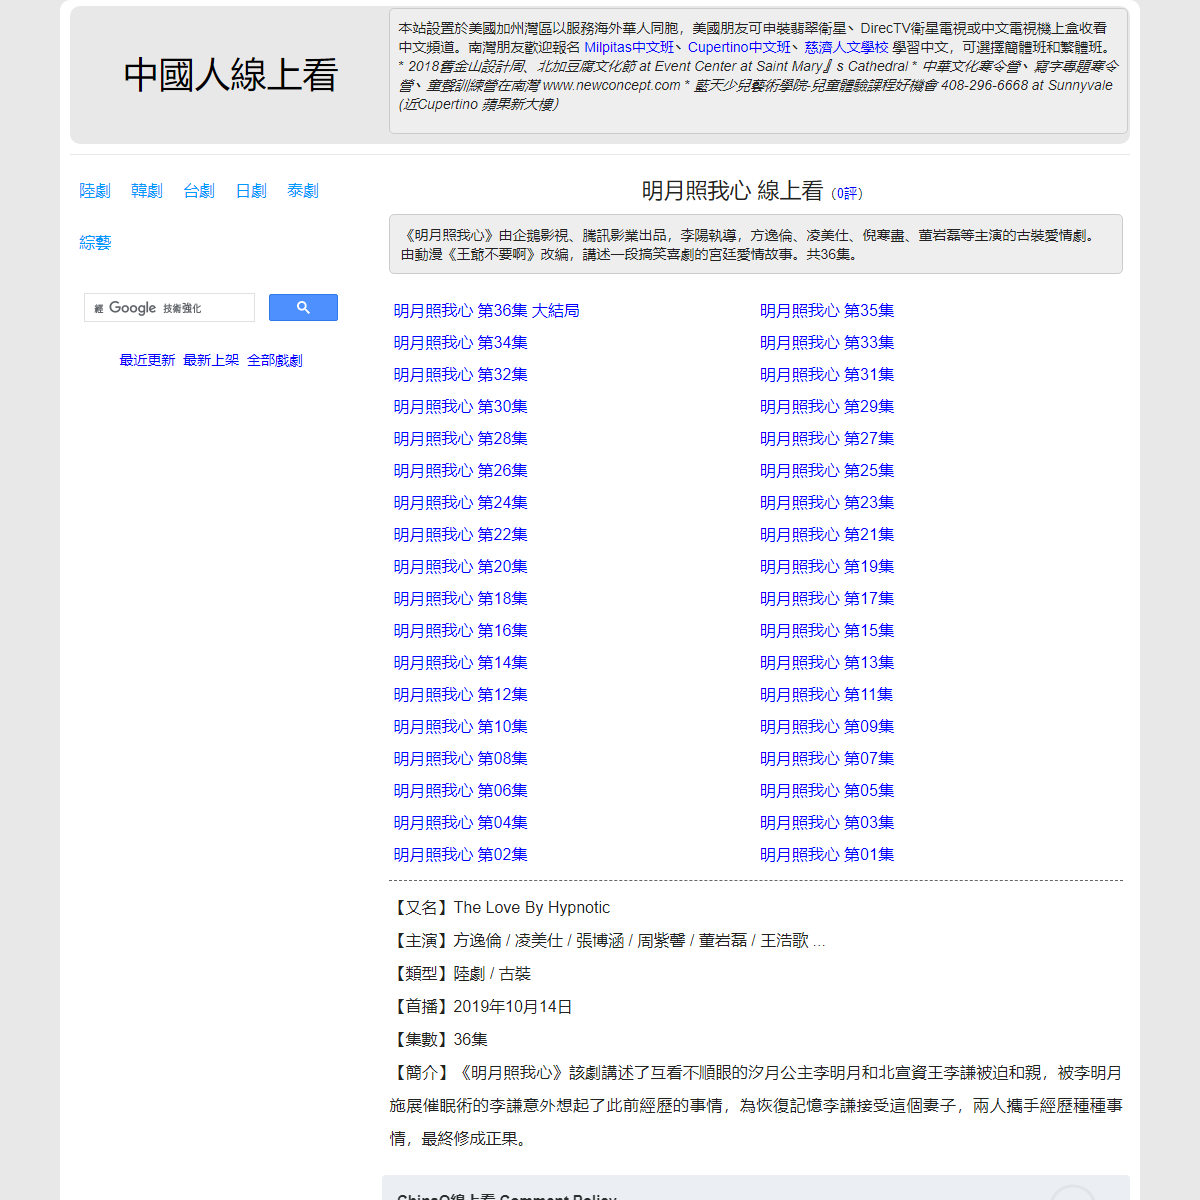 A complete backup of https://chinaq.tv/cn191014/